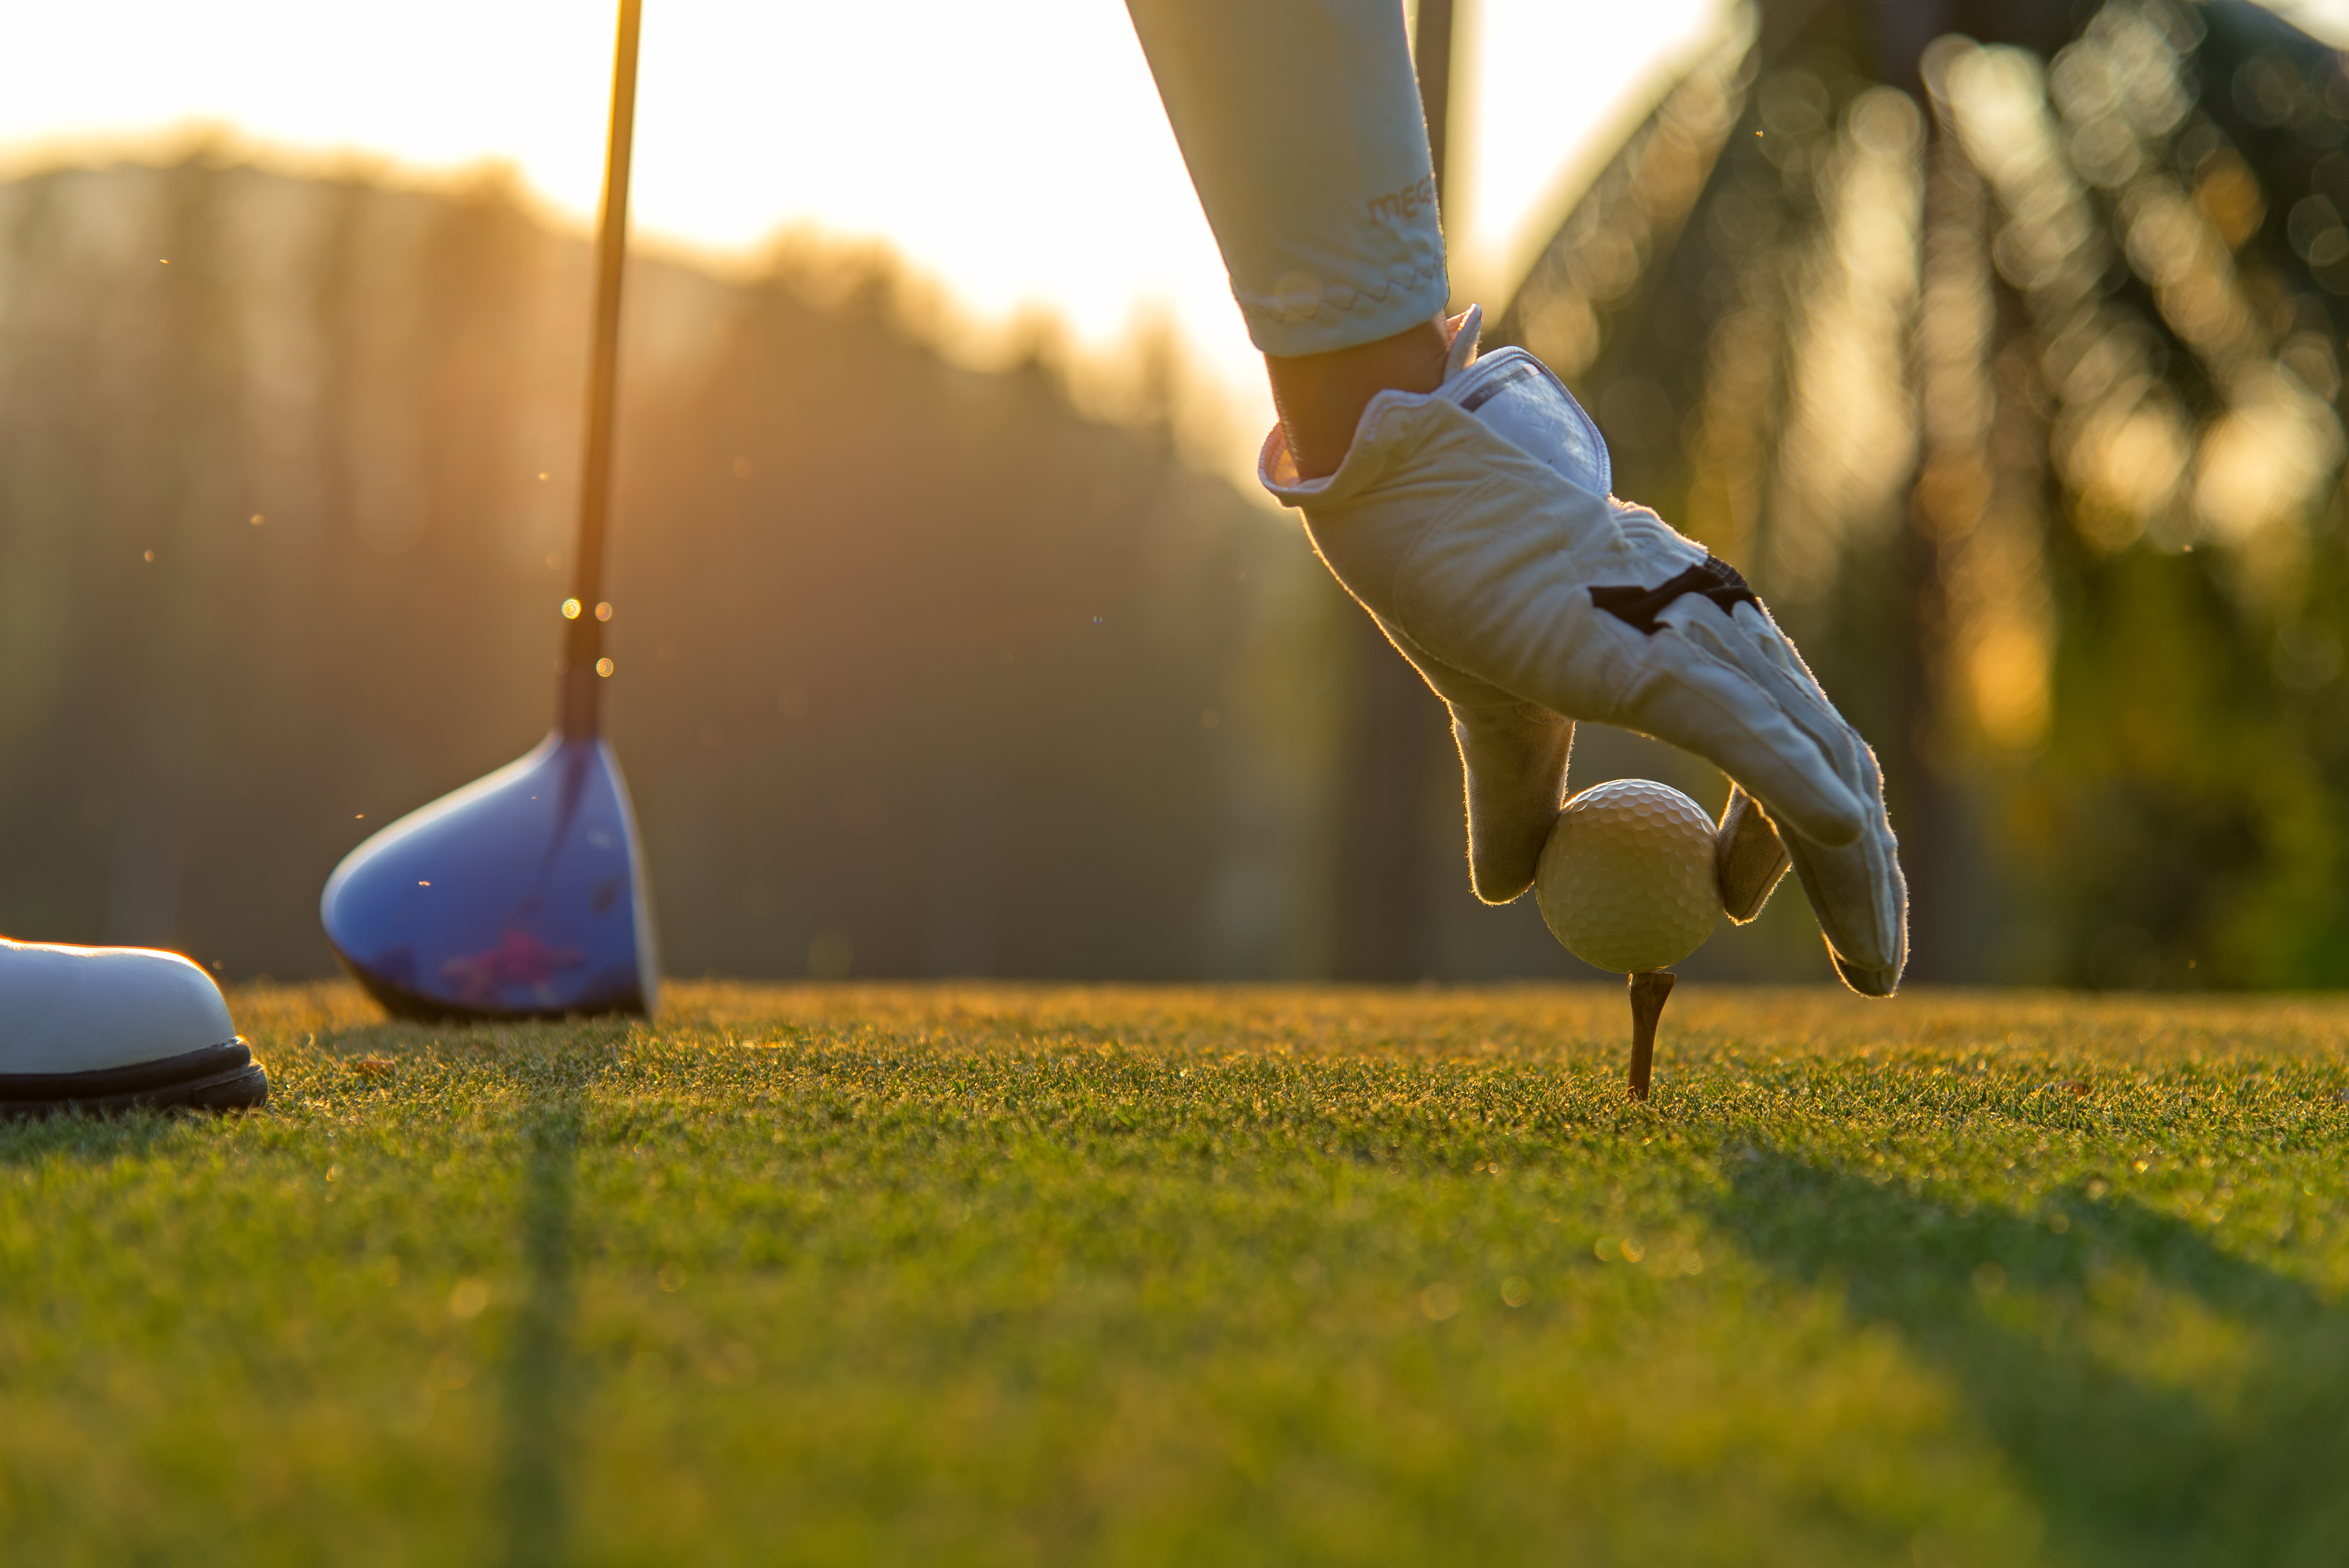 A Beginner's Guide To Golf